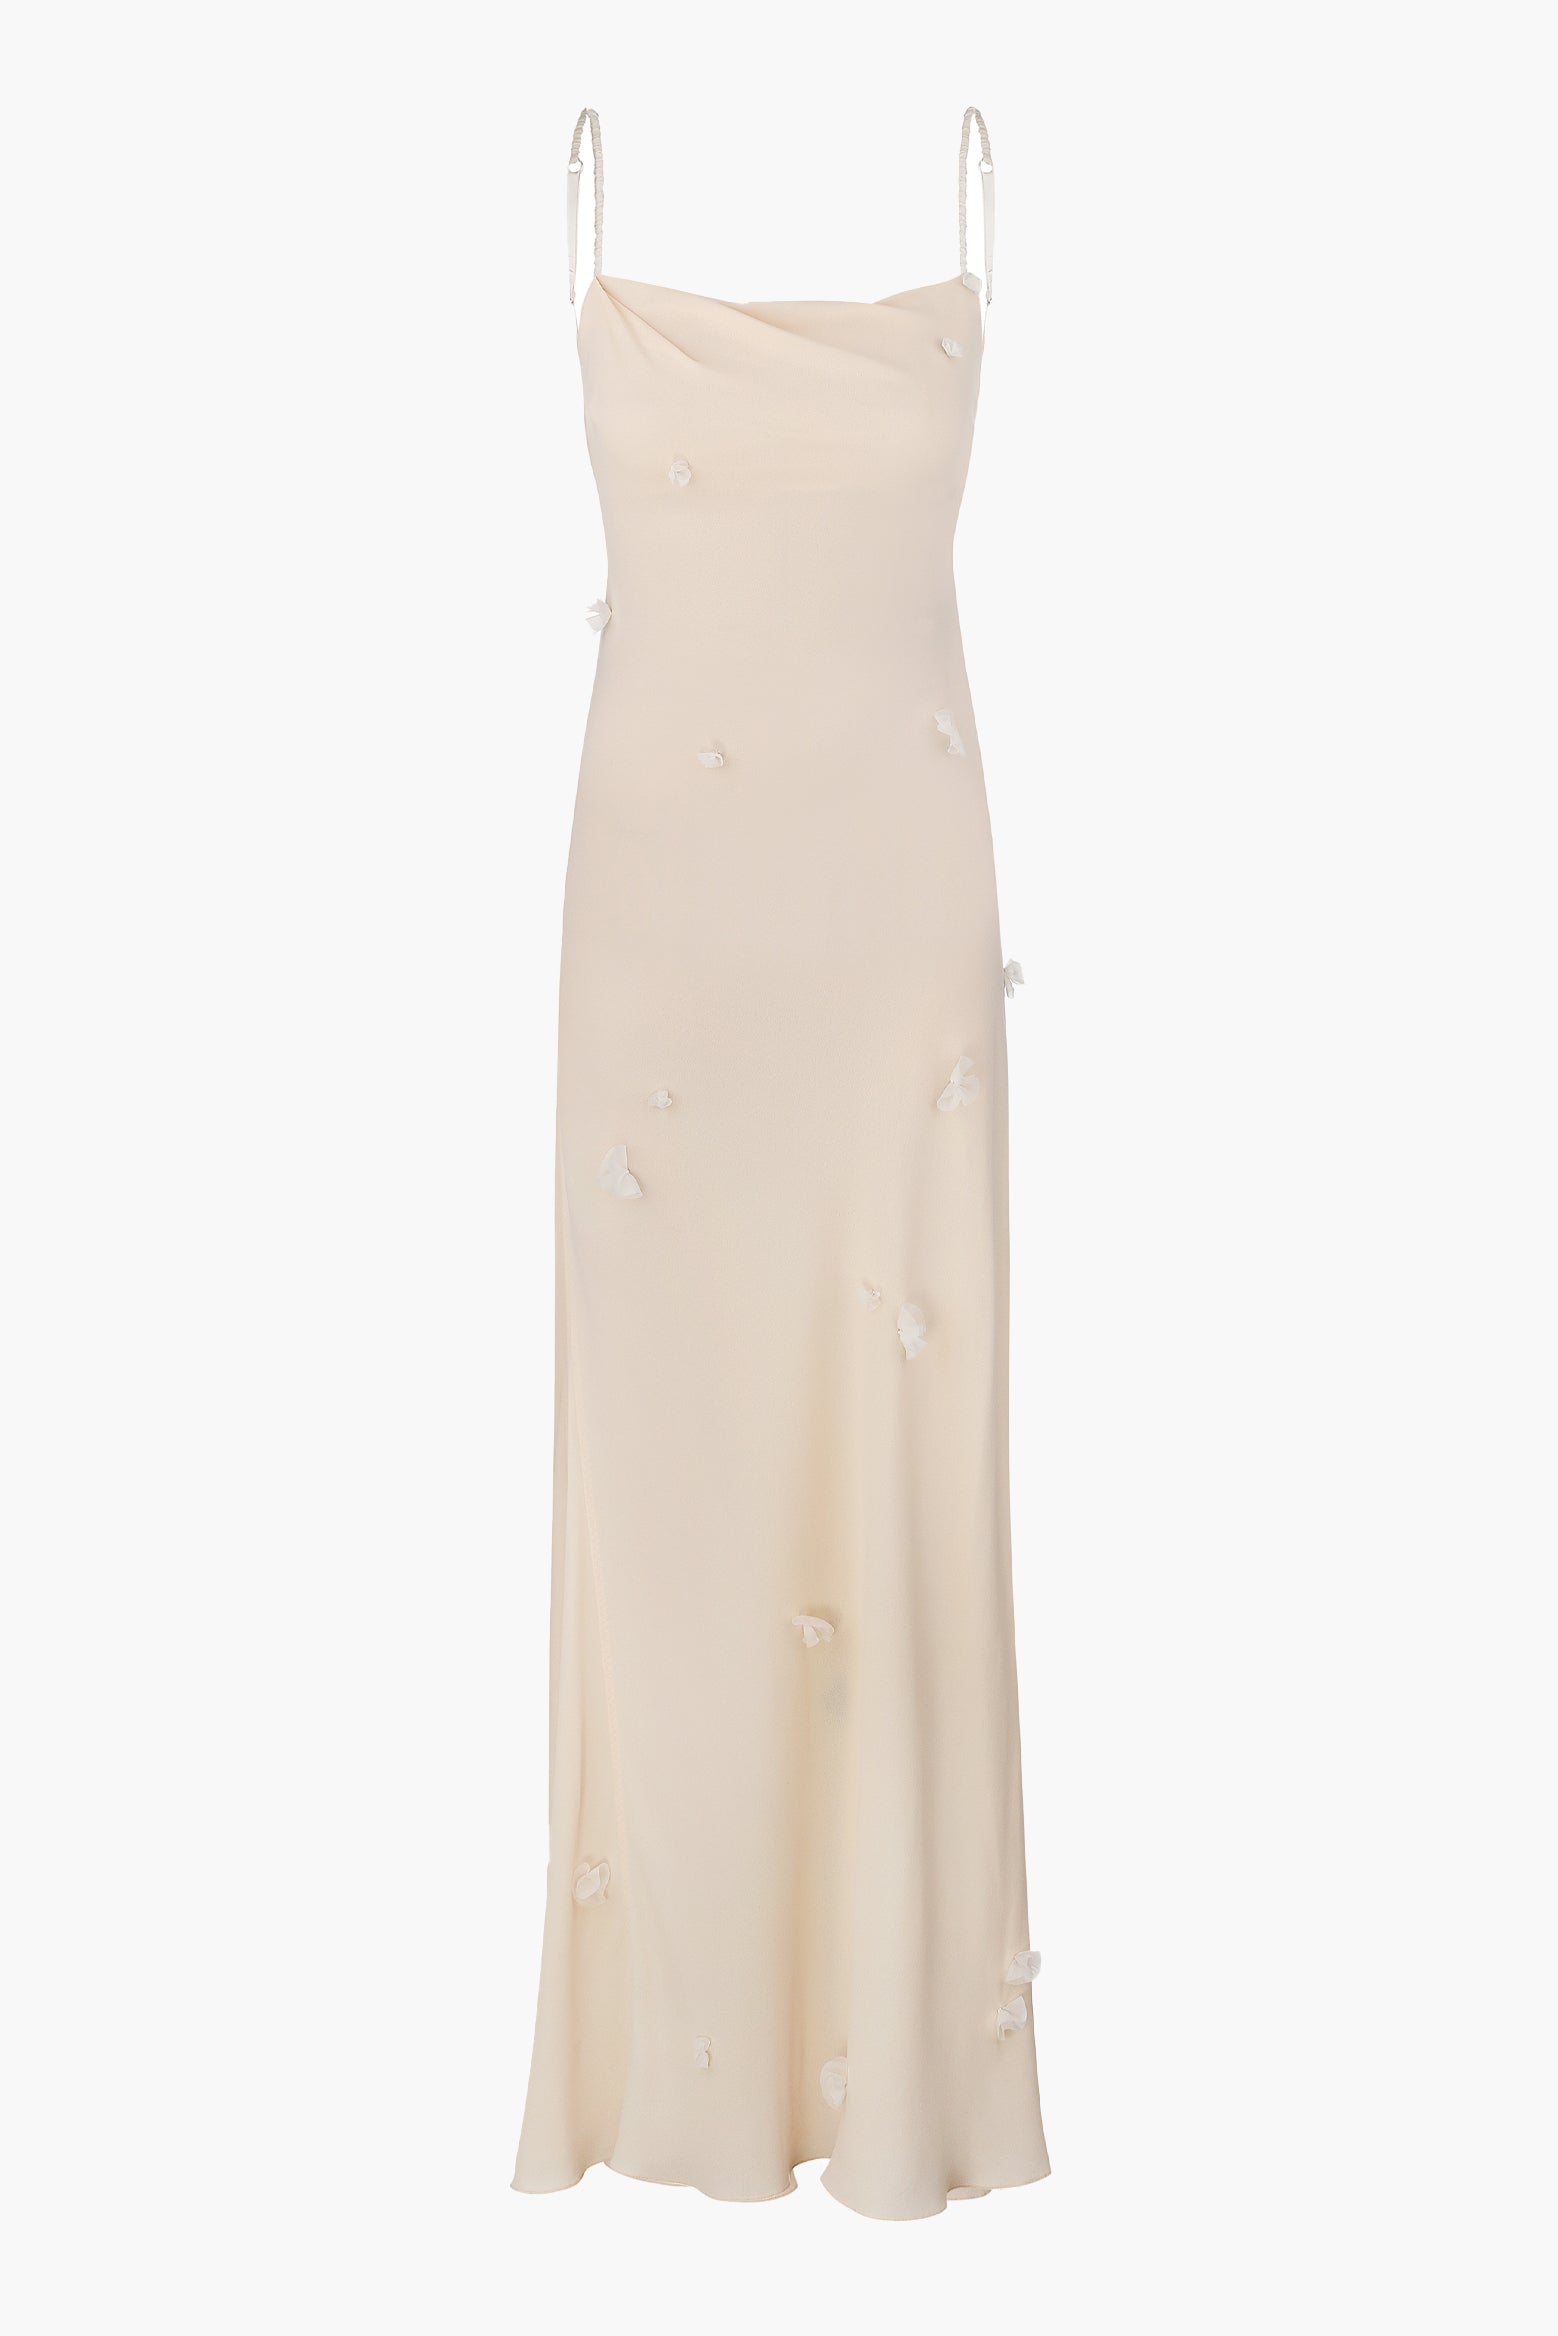 Anna October Faya Dress in Cream available at The New Trend Australia.